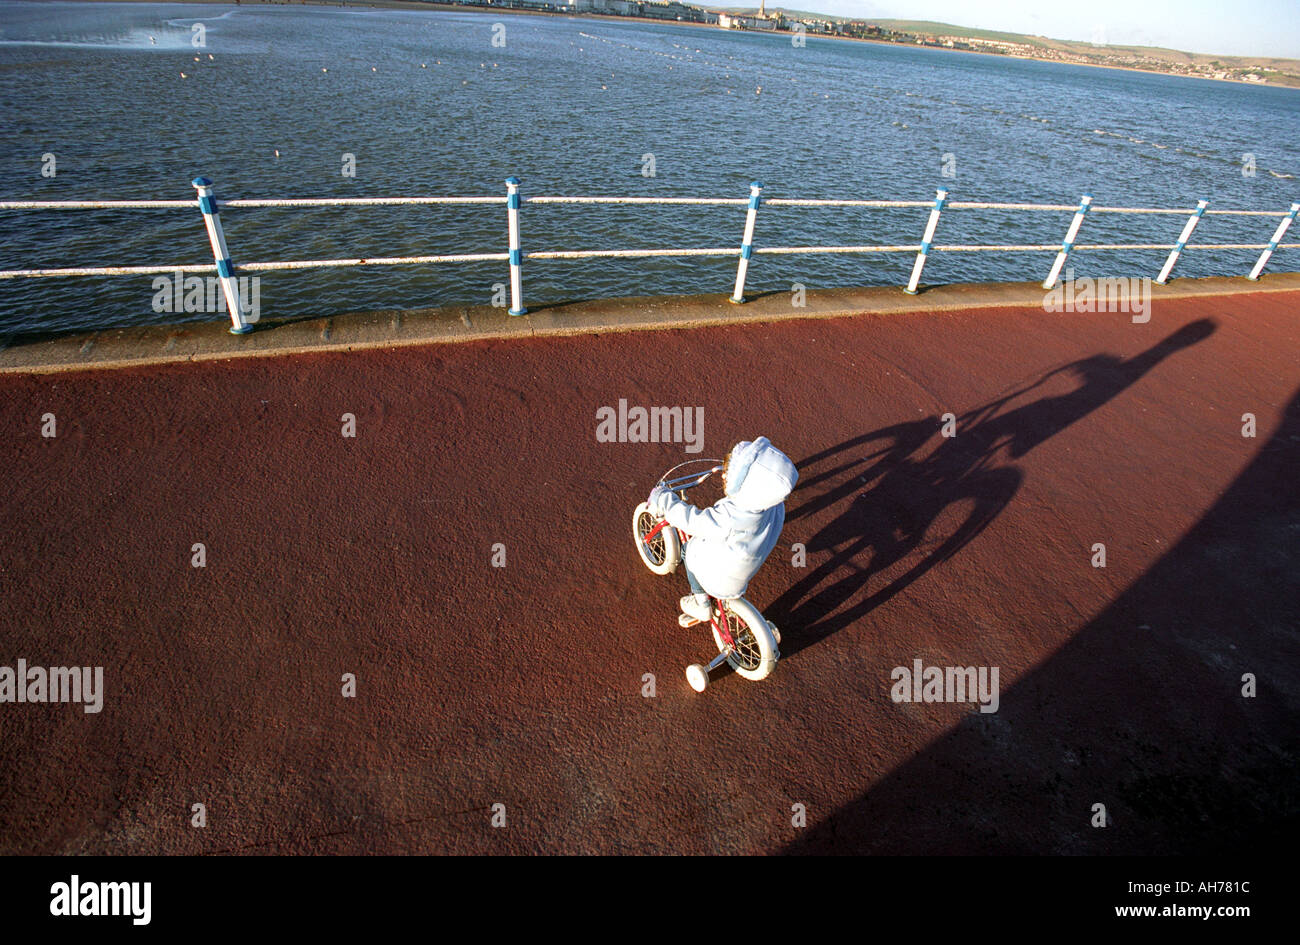 A child on a bicycle fitted with stabilisers casting a shadow Stock Photo